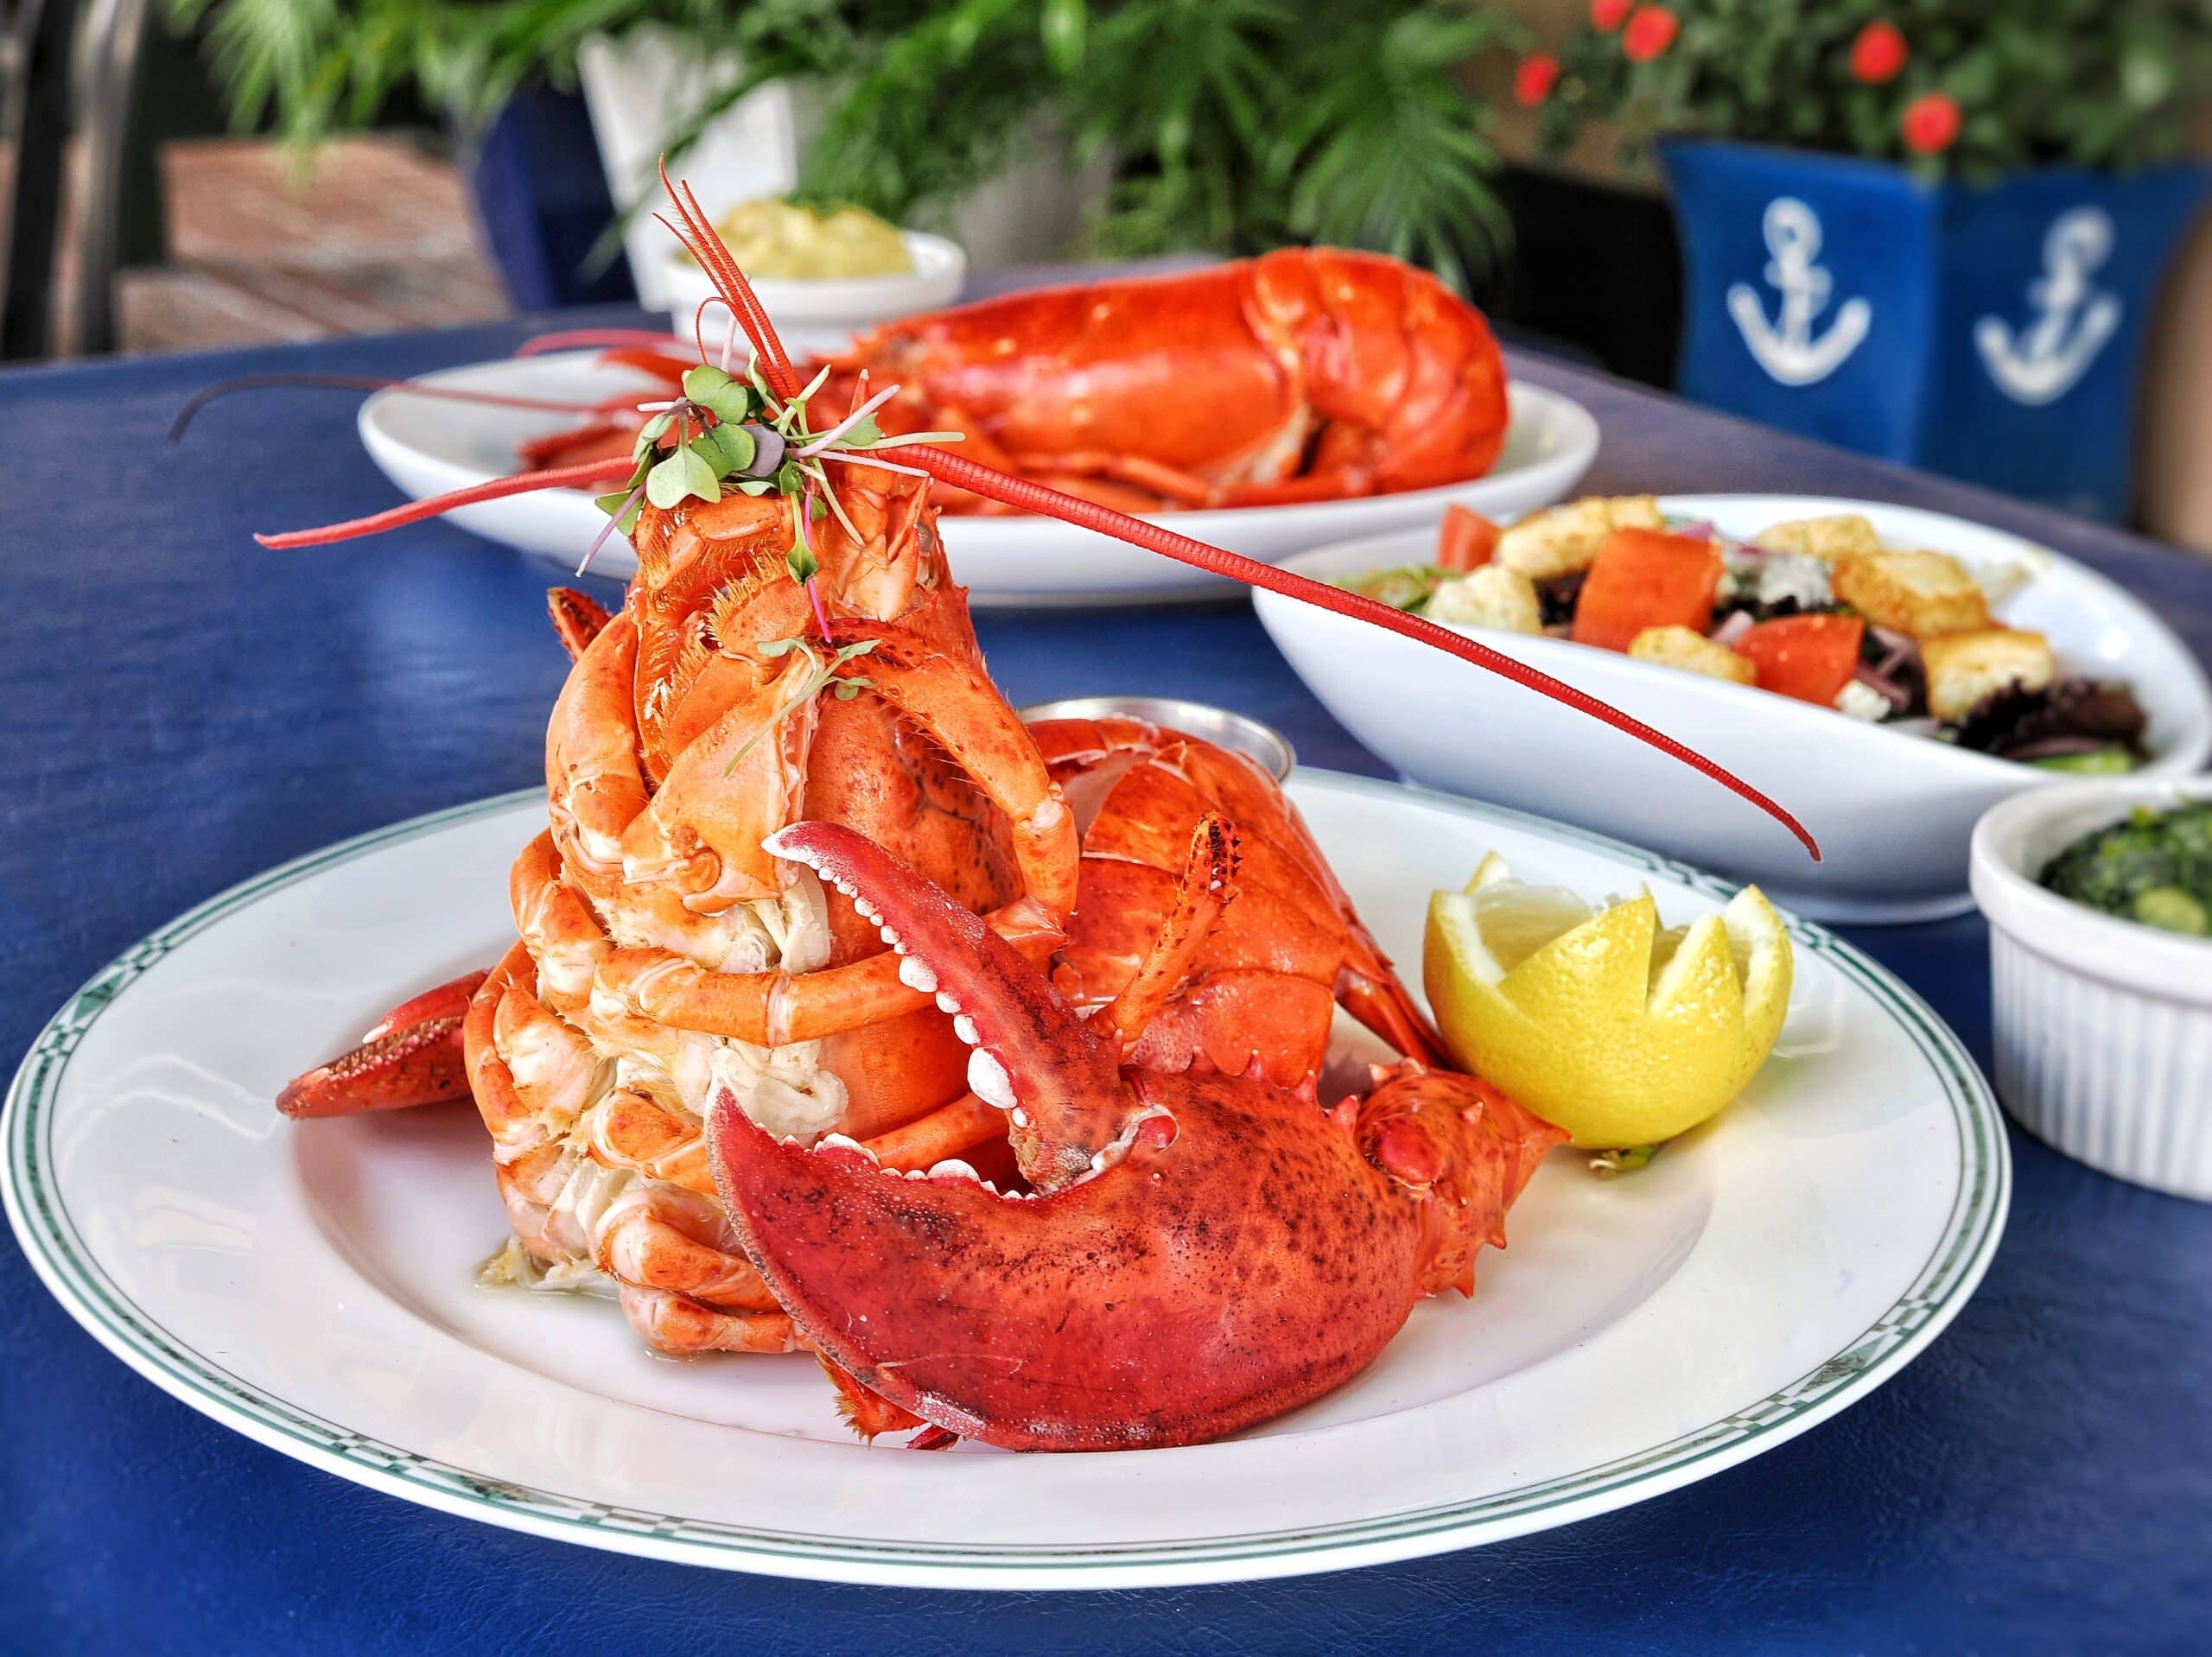 Nauti Lobster 1.5 lb Boiled Maine lobster and 1 lbs lobster special